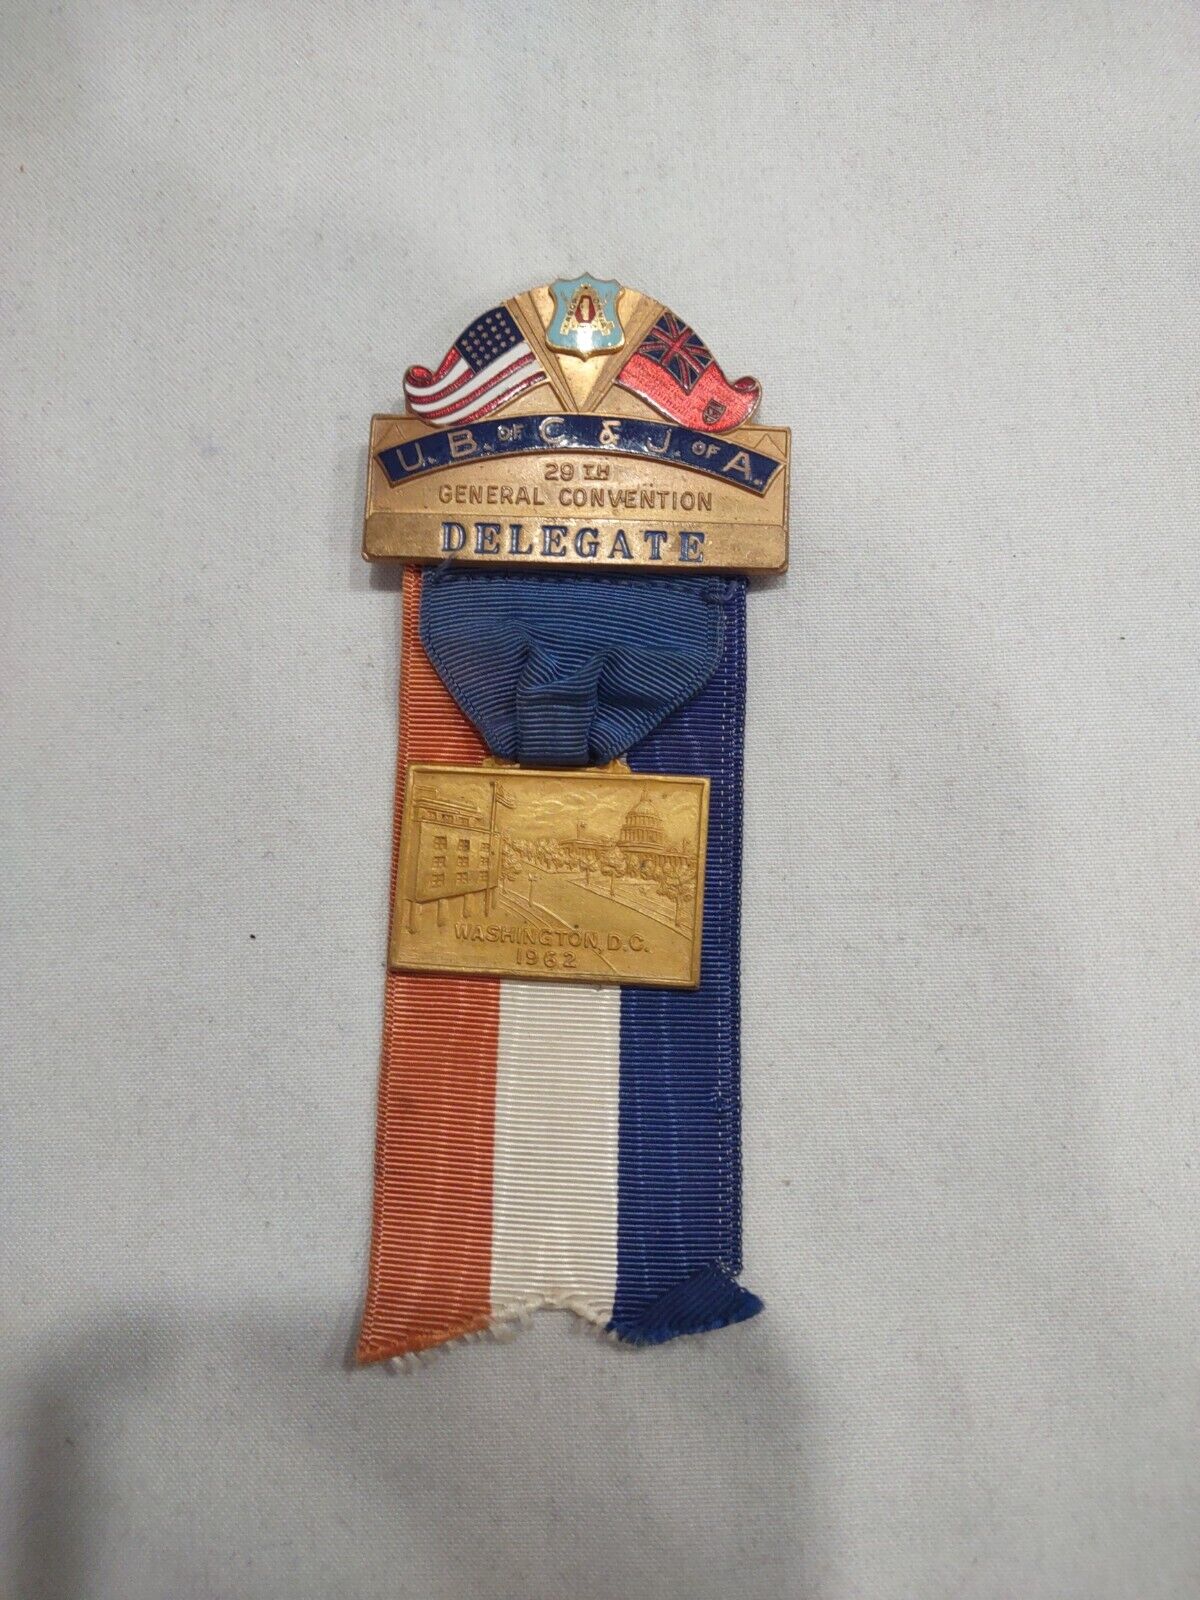 U.B. of C. & J. of A Carpenters and Joiners Labor Union 29th Convention Badge 